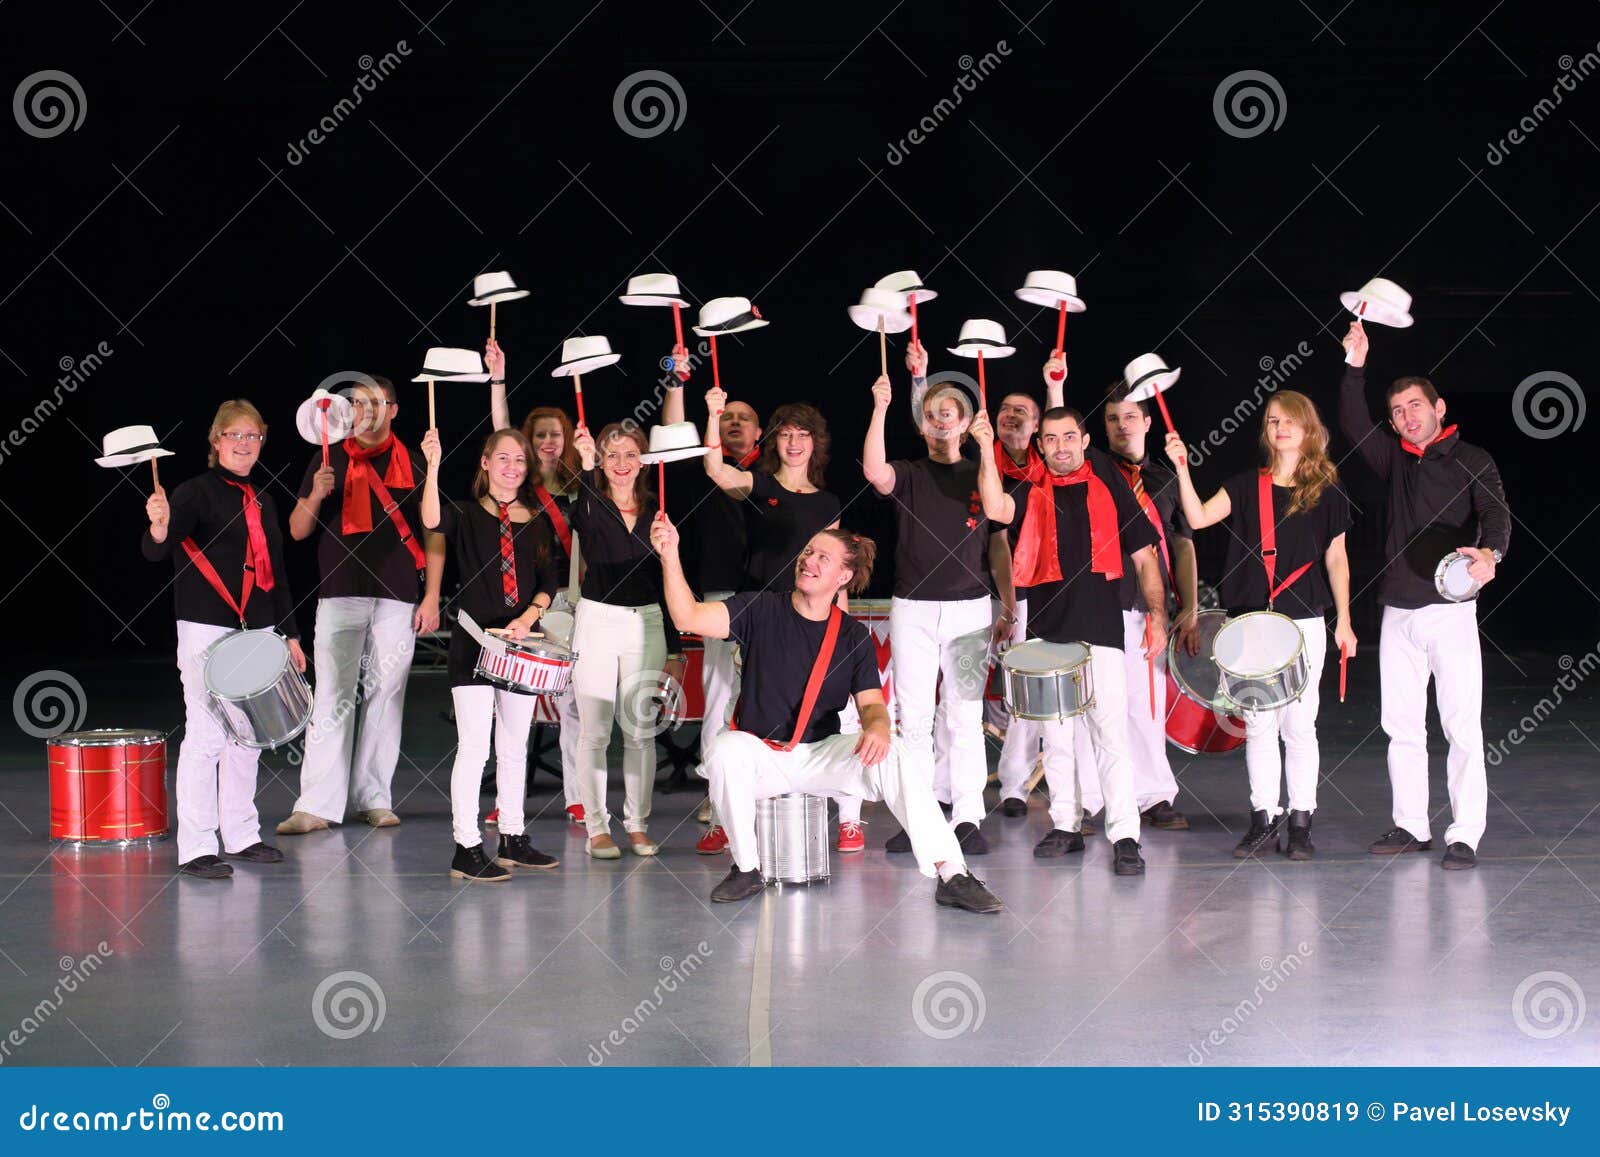 orchestra drummers in costumes with hats raised on